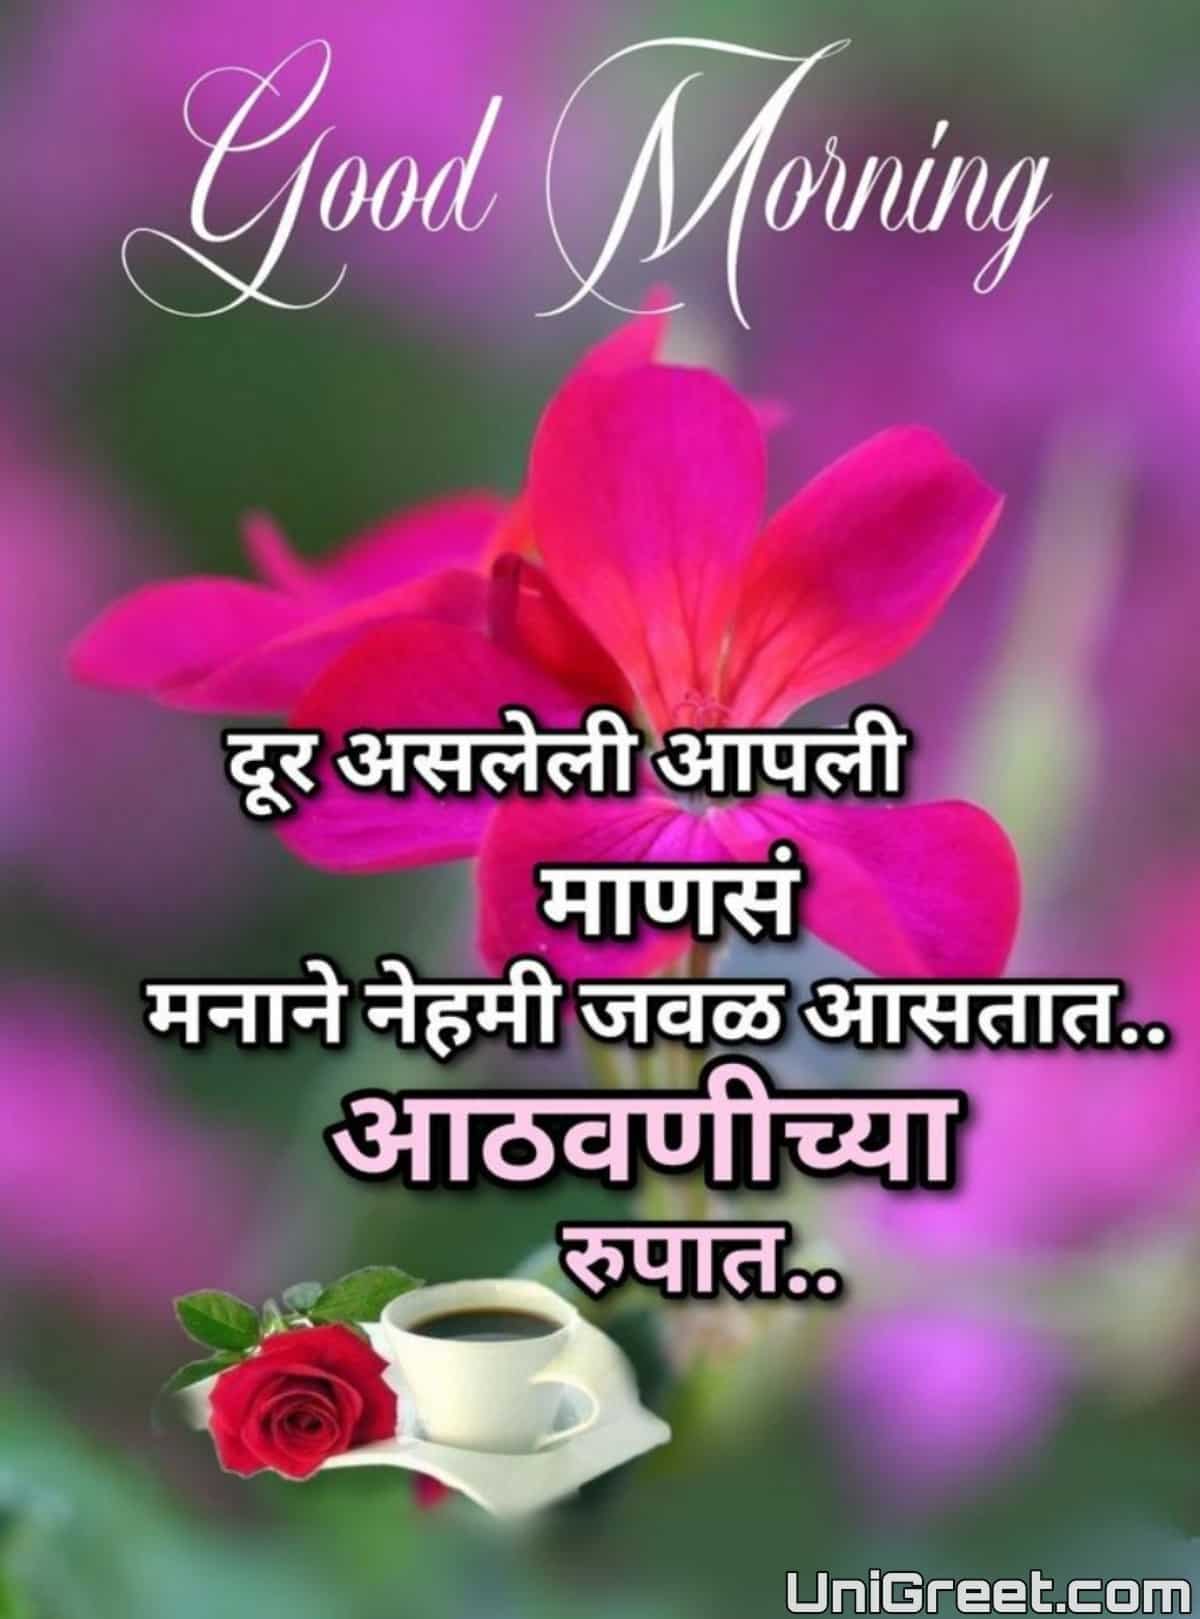 100 शुभ सकाळ मराठी शुभेच्छा | New Good Morning Images, Wishes In ...